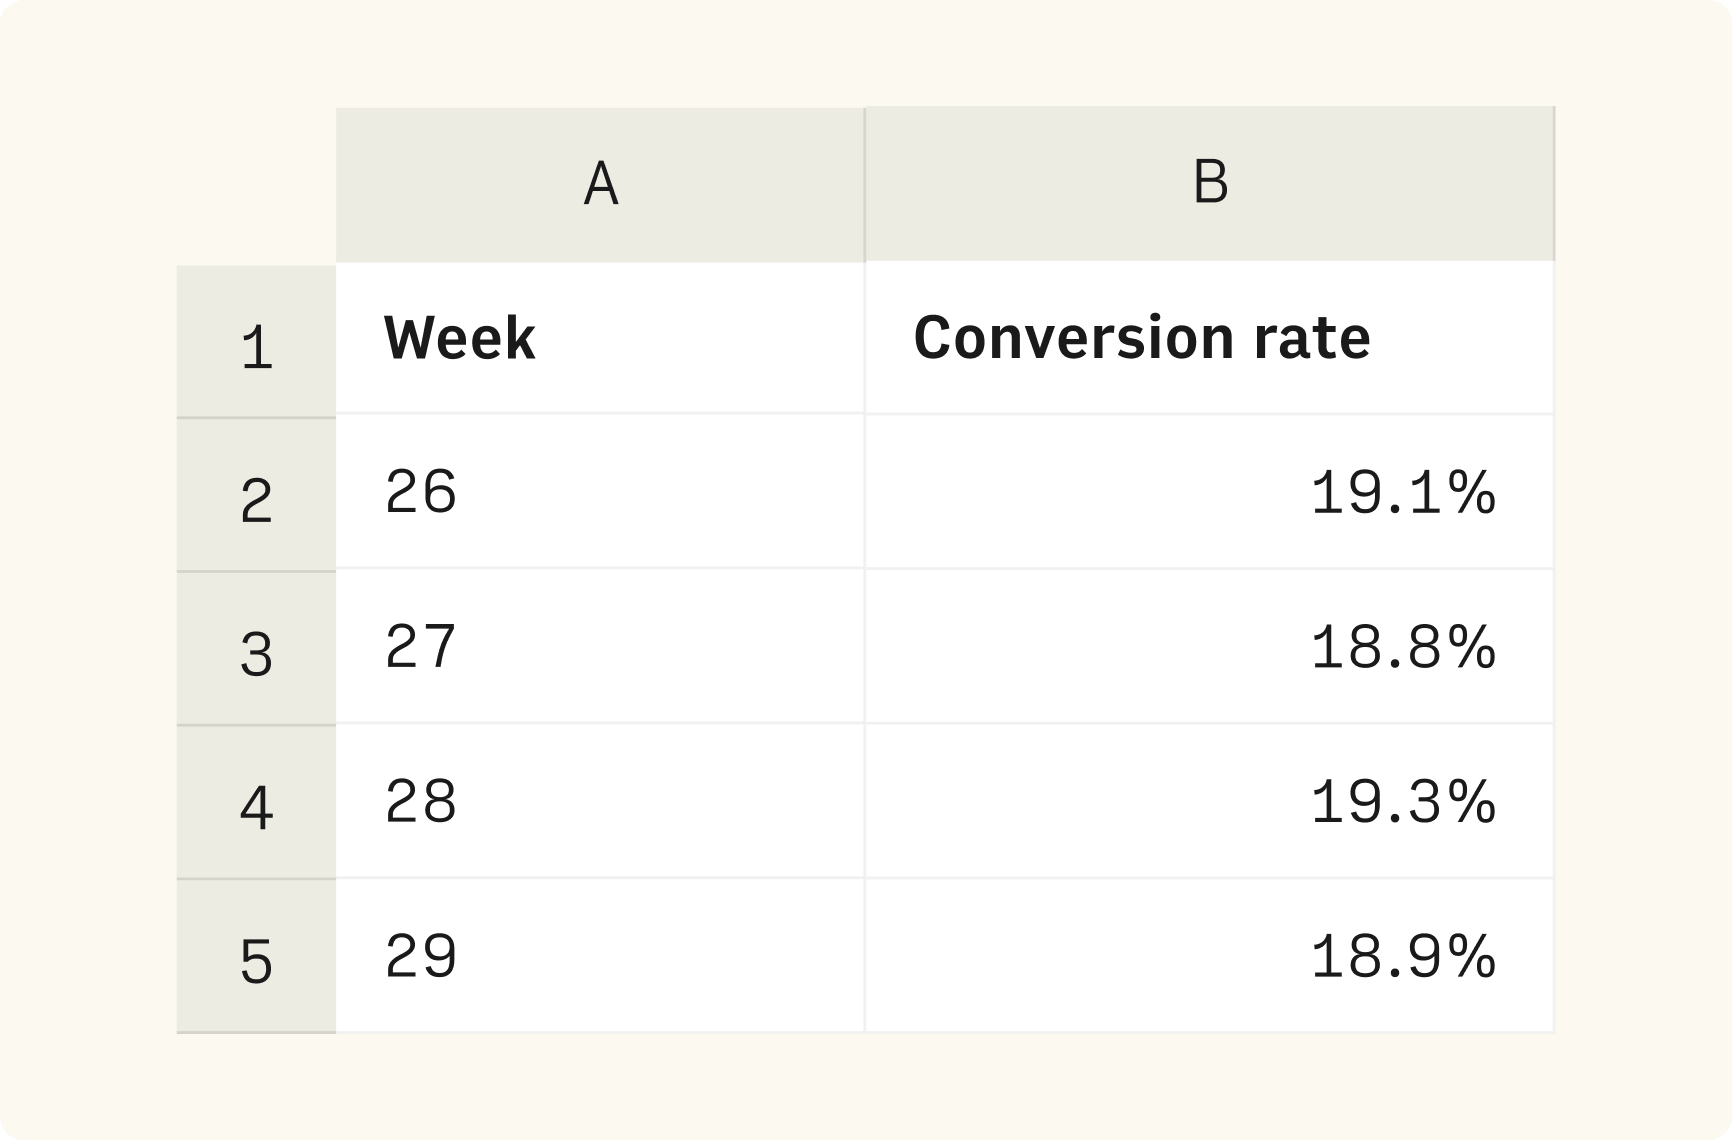 Website conversion rate